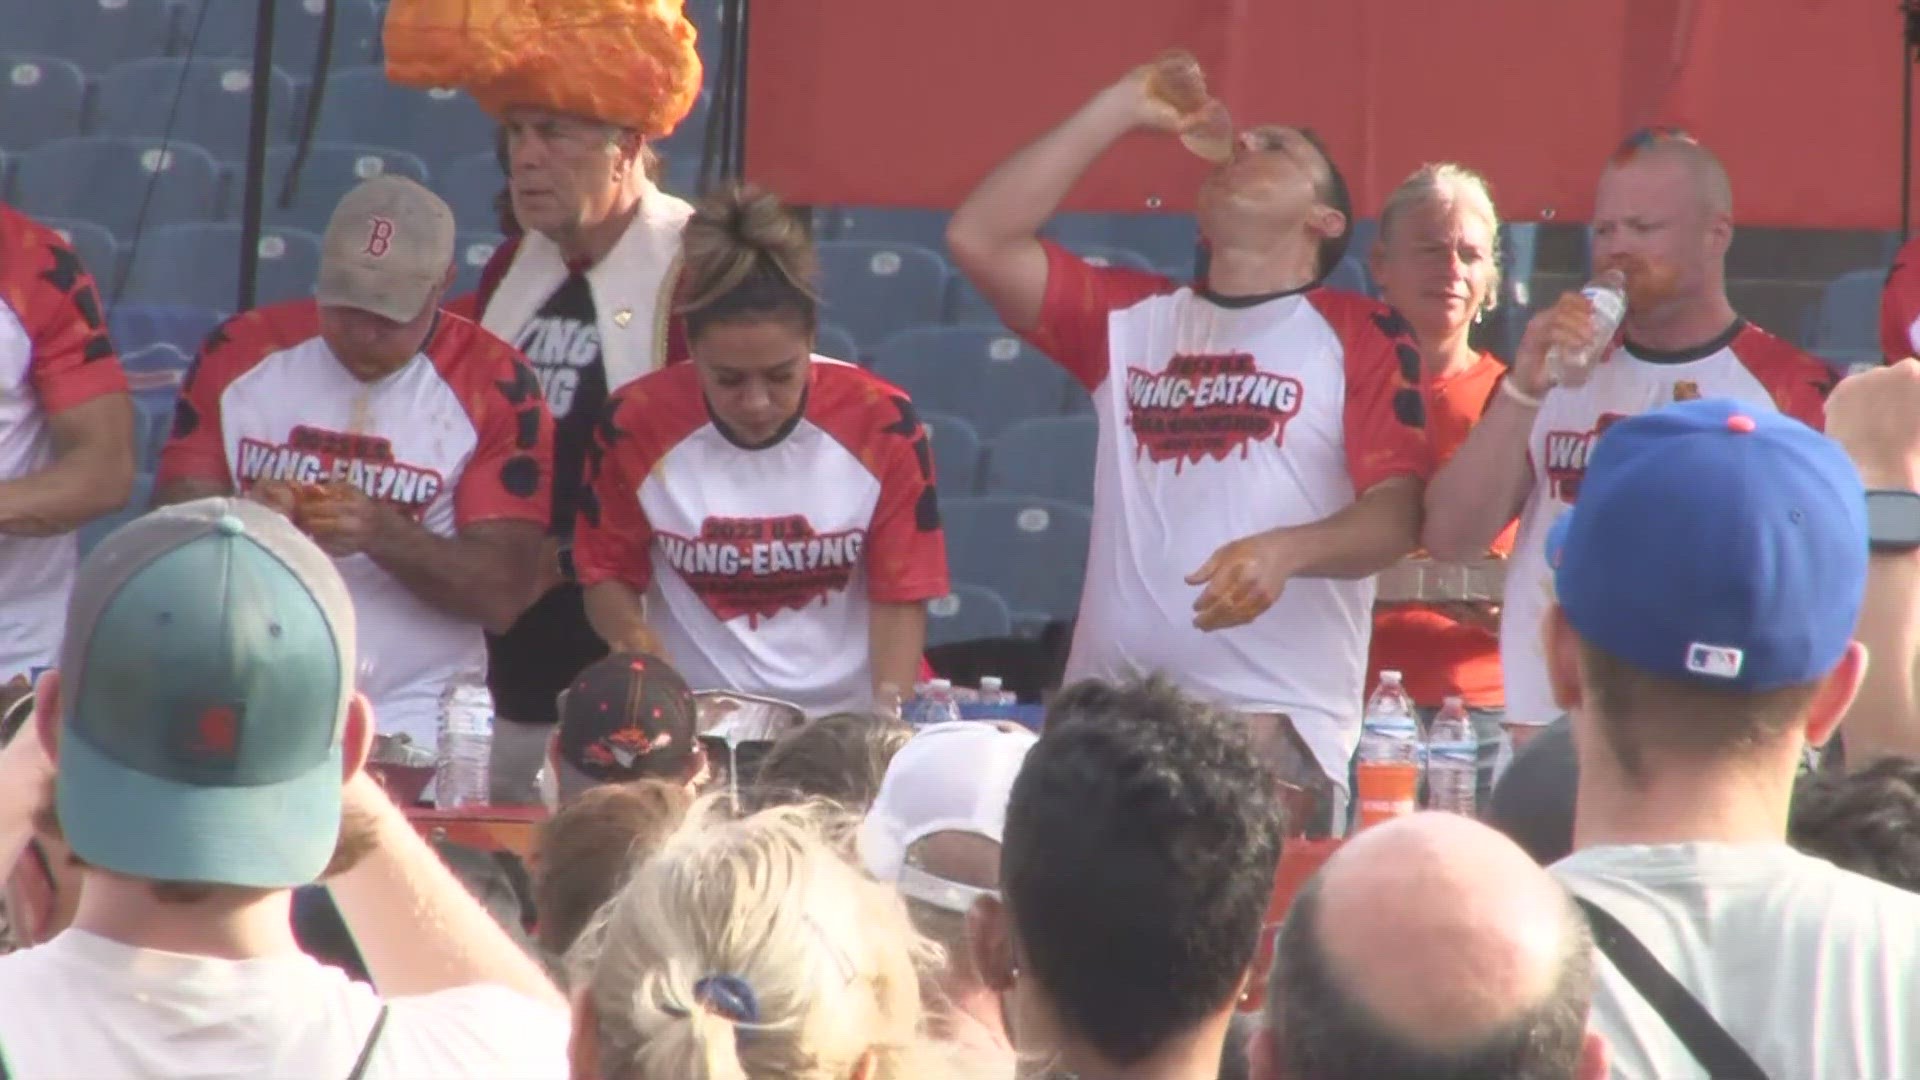 Joey Chestnut and Miki Sudo were back in Orchard Park, competing in the U.S. National Buffalo Wing Eating Championship. Sudo won the wing eating contest in 2022.